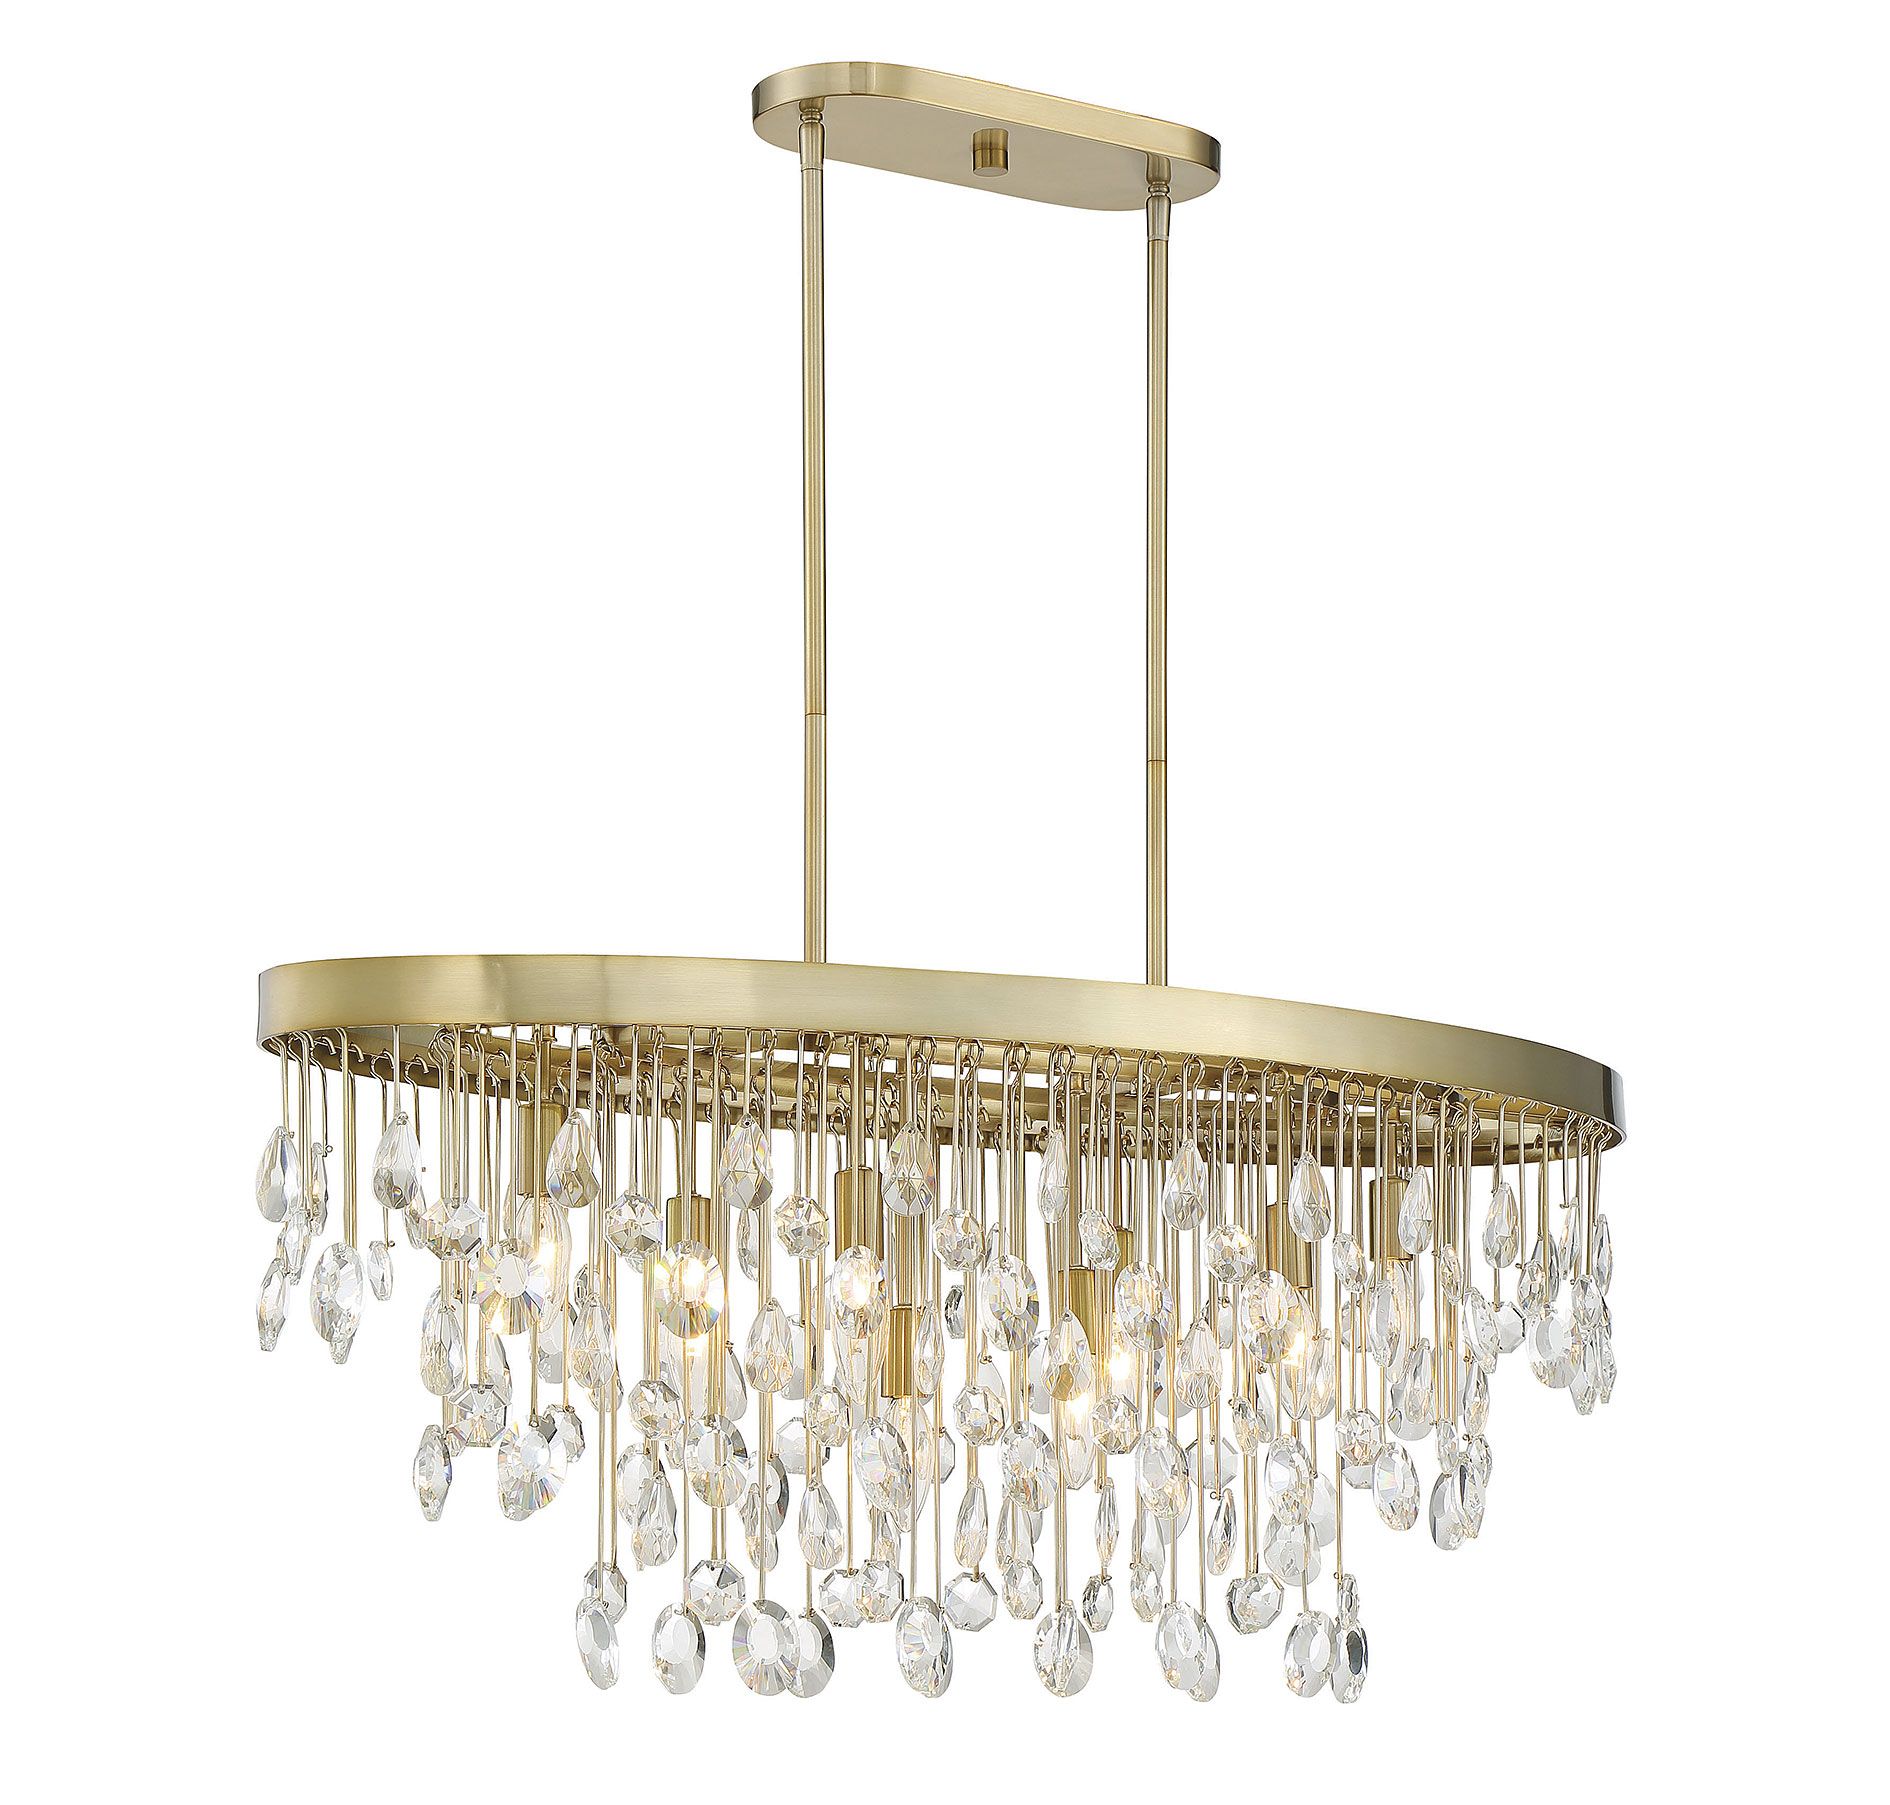 Savoy House Livorno 8-Light Linear Chandelier in Noble Brass 1-1847-8-127